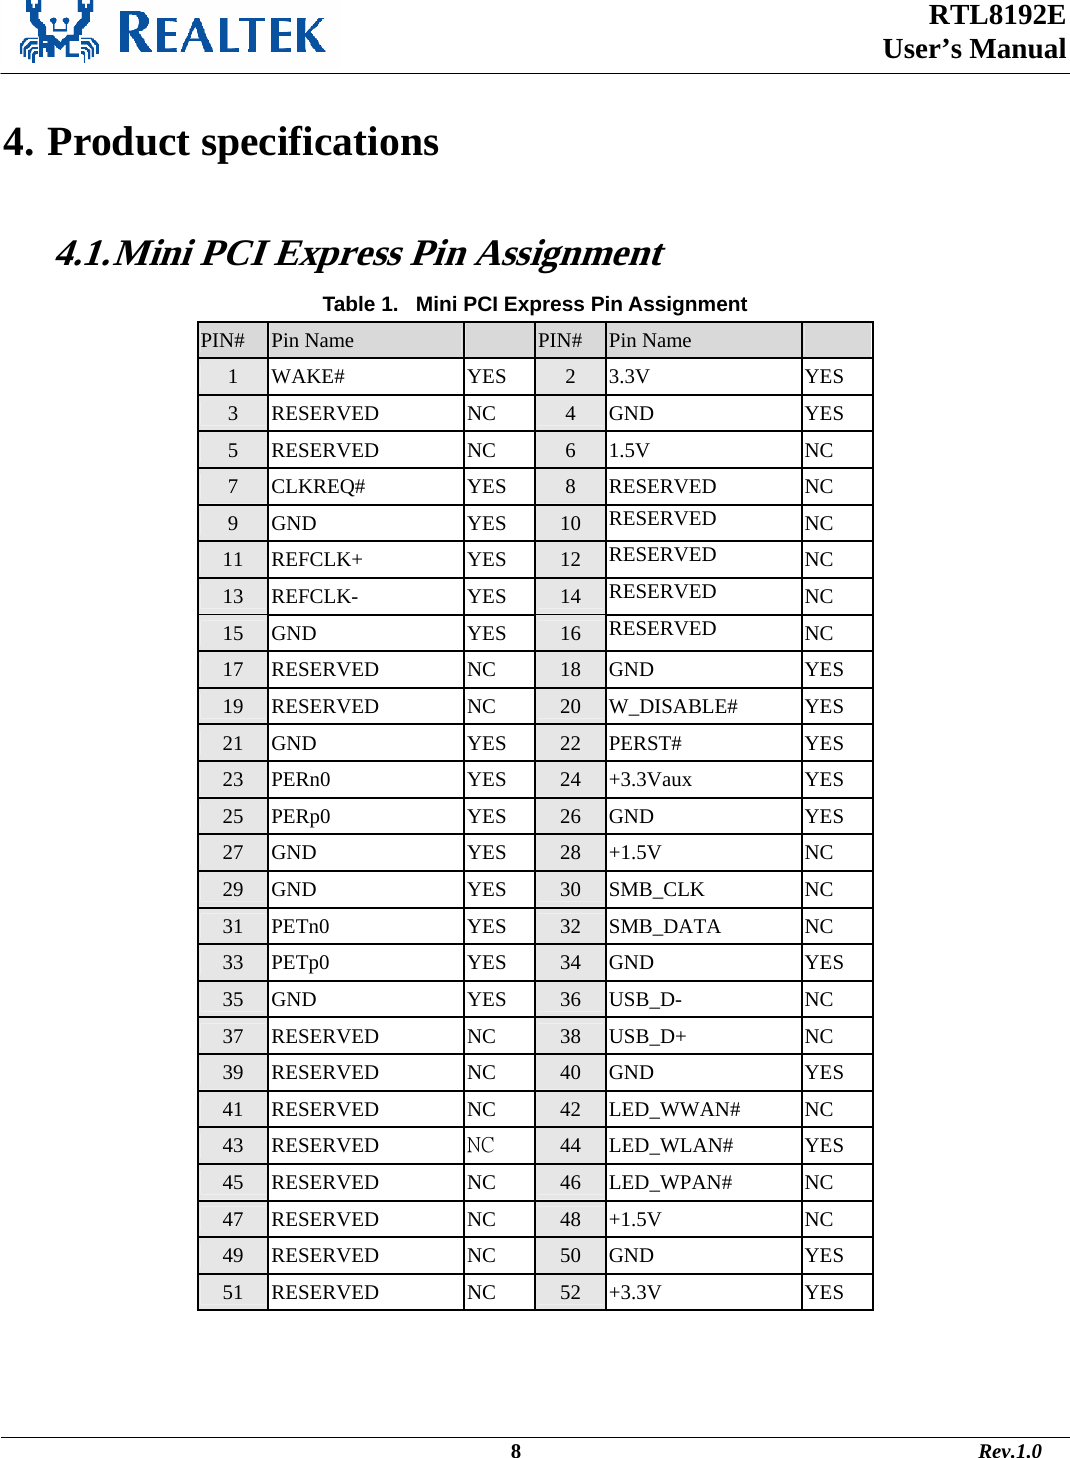  RTL8192E  User’s Manual                                                                                             8                                                                                       Rev.1.0    4. Product specifications  4.1. Mini PCI Express Pin Assignment Table 1.   Mini PCI Express Pin Assignment PIN# Pin Name   PIN# Pin Name   1 WAKE# YES 2 3.3V YES 3 RESERVED NC 4 GND YES 5 RESERVED NC 6 1.5V NC 7 CLKREQ# YES 8 RESERVED NC 9 GND YES 10 RESERVED  NC 11 REFCLK+ YES 12 RESERVED  NC 13 REFCLK- YES 14 RESERVED  NC 15 GND YES 16 RESERVED  NC 17 RESERVED NC 18 GND YES 19 RESERVED NC 20 W_DISABLE# YES 21 GND YES 22 PERST# YES 23 PERn0 YES 24 +3.3Vaux YES 25 PERp0 YES 26 GND YES 27 GND YES 28 +1.5V NC 29 GND YES 30 SMB_CLK NC 31 PETn0 YES 32 SMB_DATA NC 33 PETp0 YES 34 GND YES 35 GND YES 36 USB_D- NC 37 RESERVED NC 38 USB_D+ NC 39 RESERVED NC 40 GND YES 41 RESERVED NC 42 LED_WWAN# NC 43 RESERVED NC  44 LED_WLAN# YES 45 RESERVED NC 46 LED_WPAN# NC 47 RESERVED NC 48 +1.5V NC 49 RESERVED NC 50 GND YES 51 RESERVED NC 52 +3.3V YES  